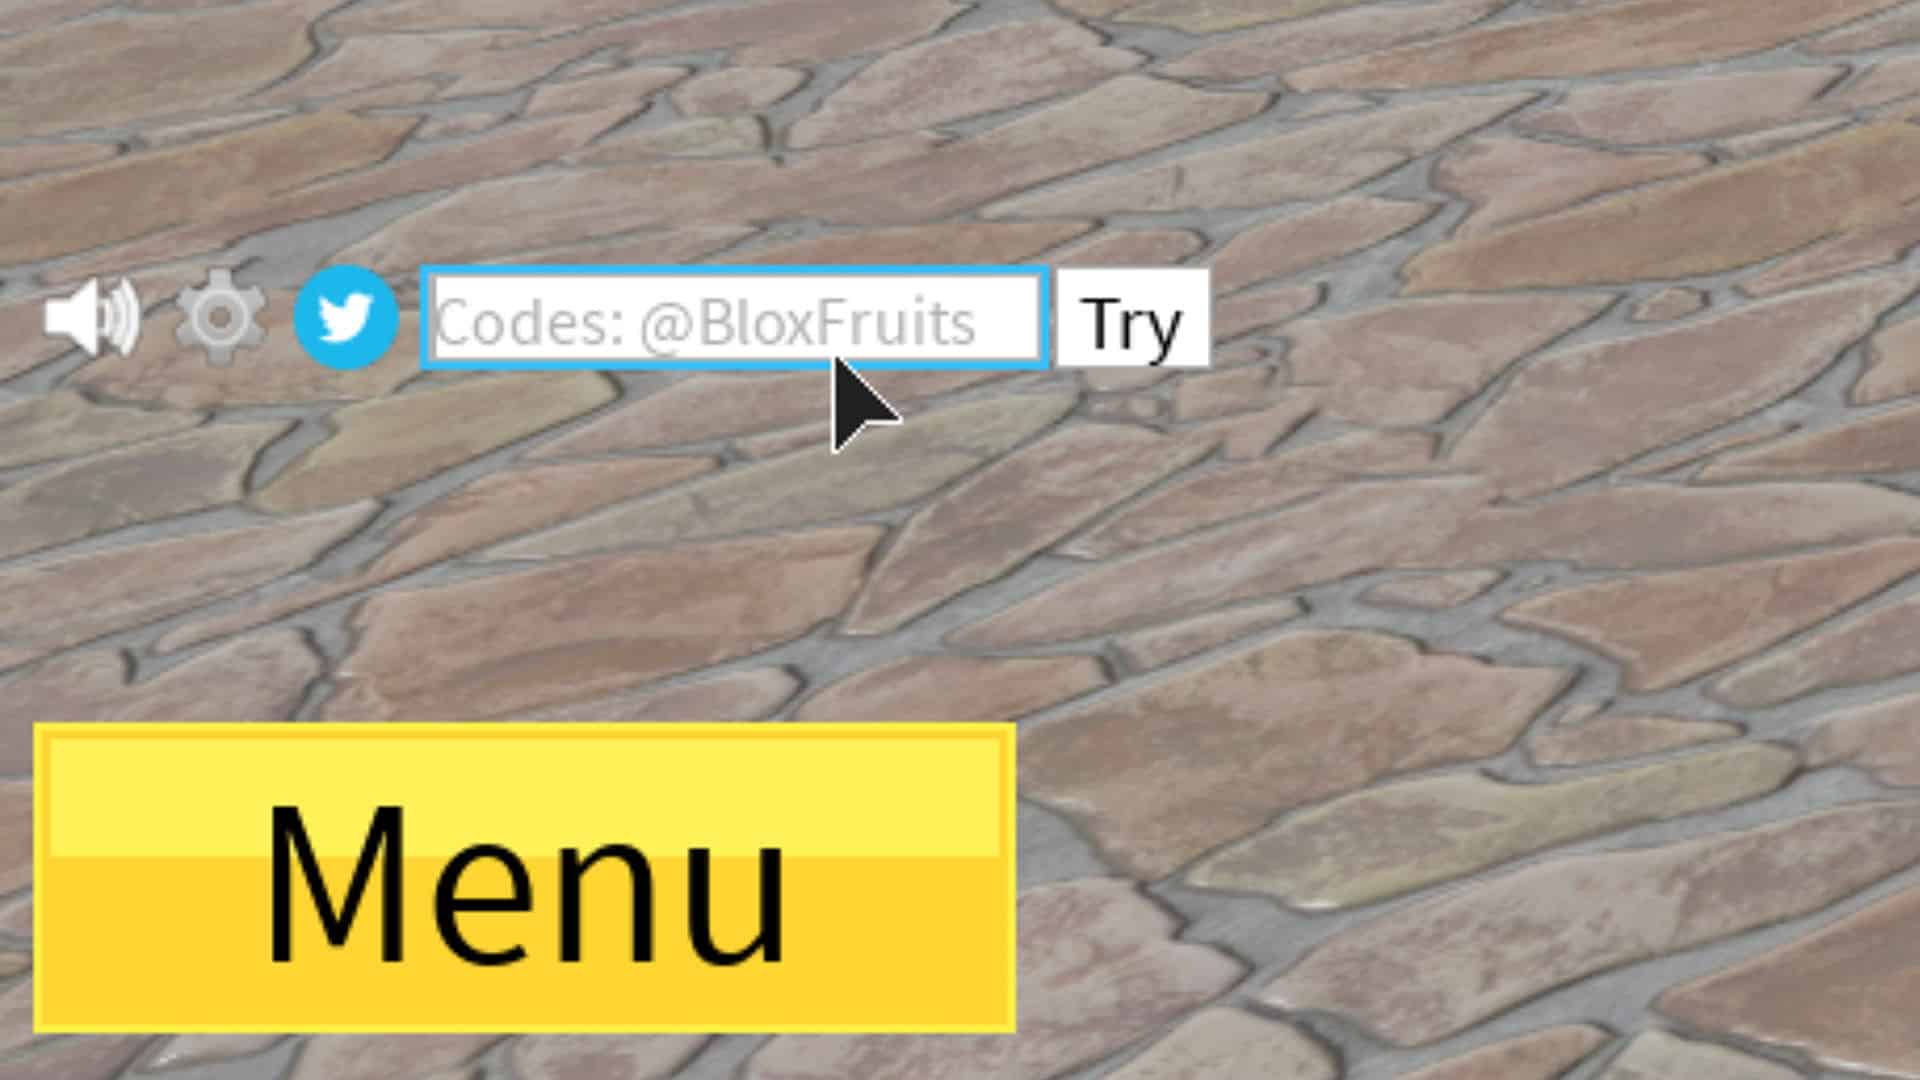 An image showing how to tướng redeem codes in Roblox Blox fruits